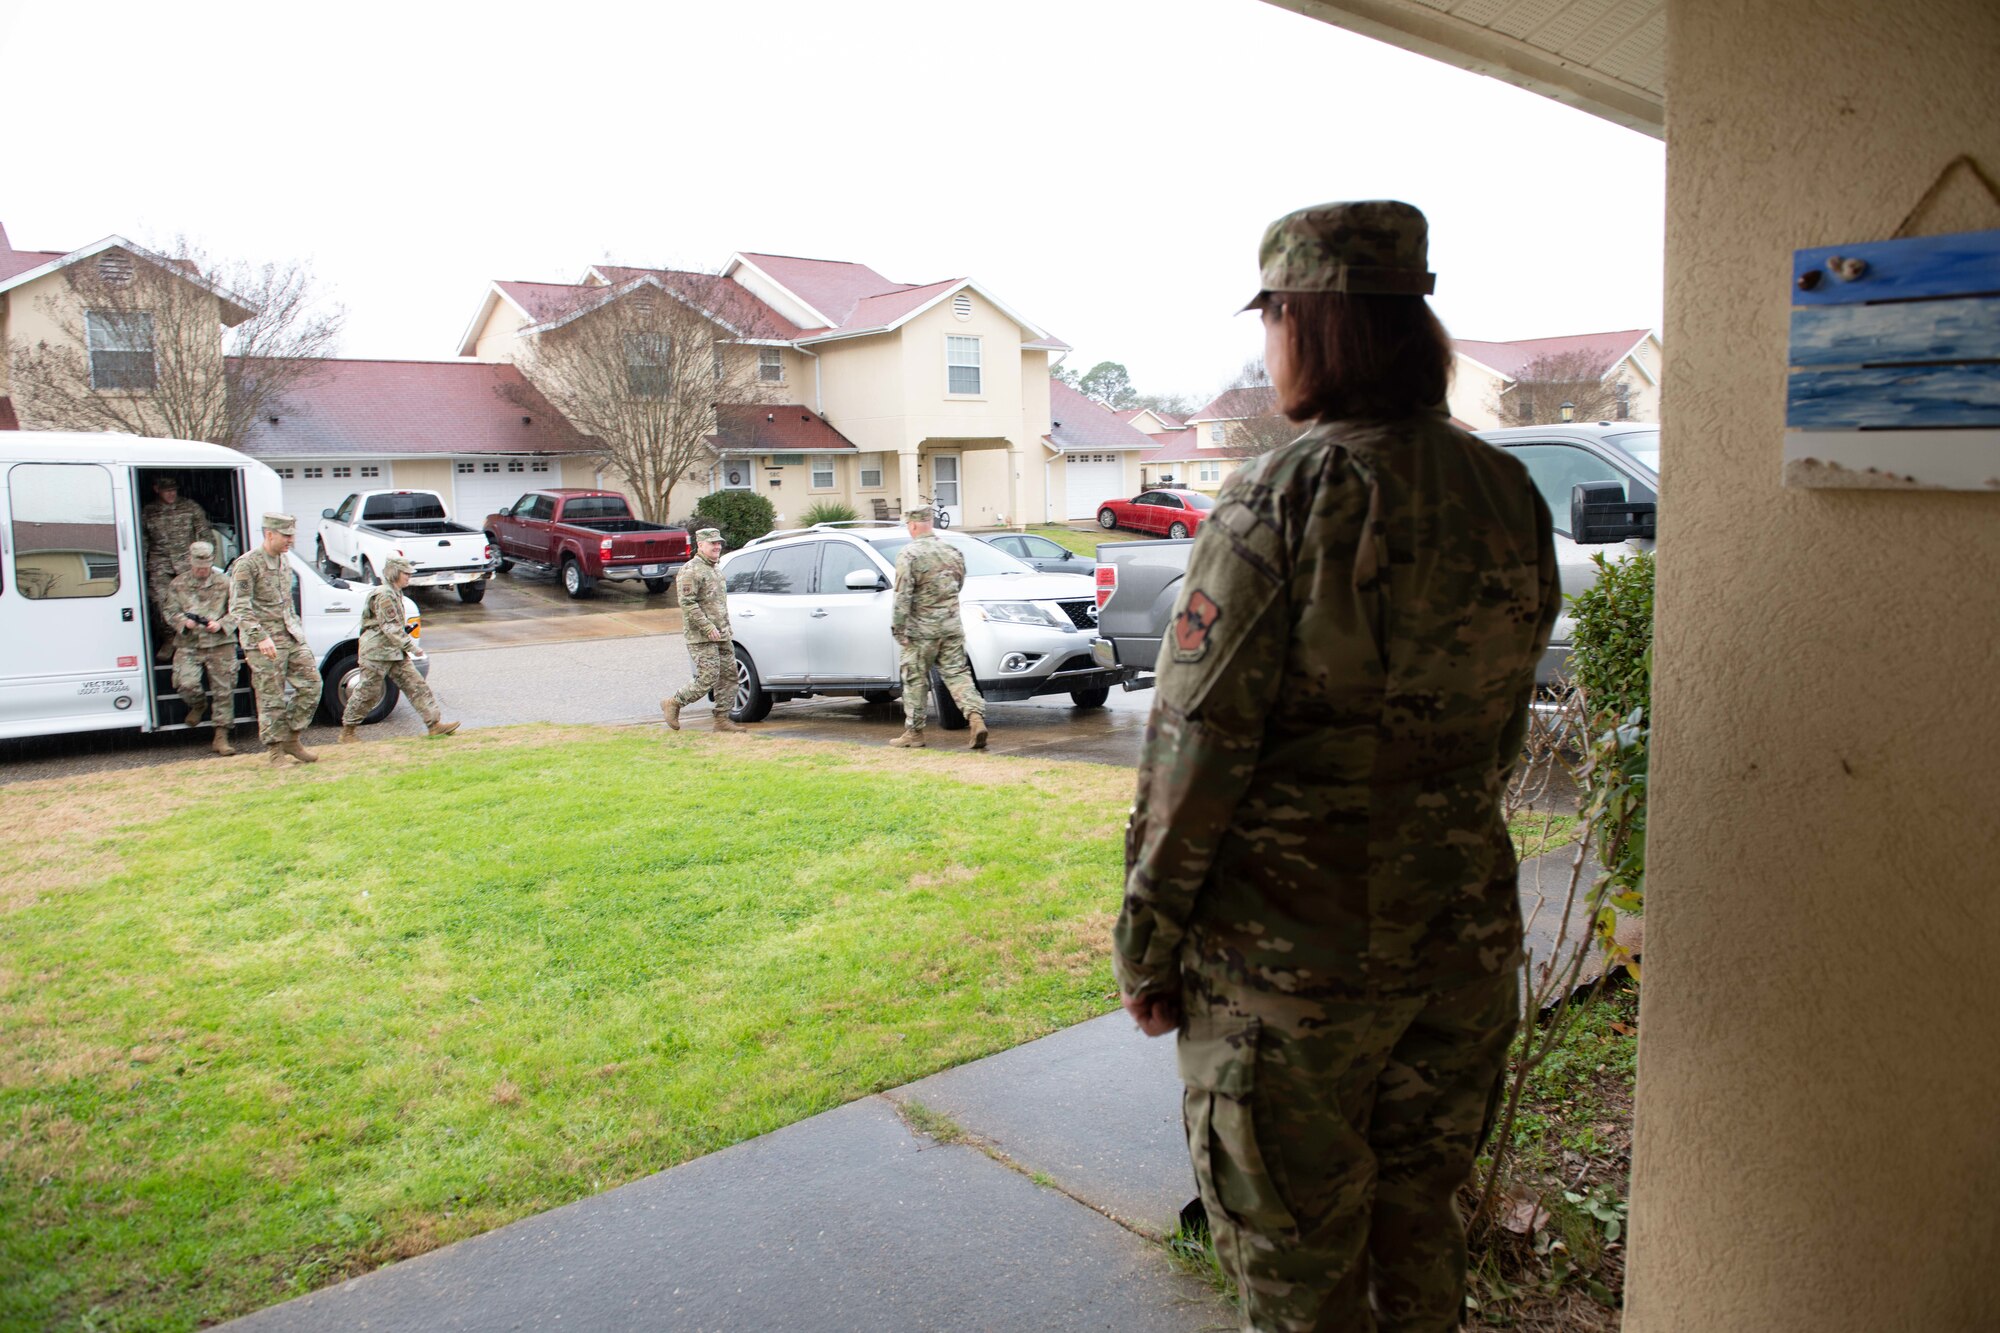 Master Sgt. Erica Brown, from the 42nd Medical Support Squadron, waits as her husband, Master Sgt. Brian Brown, from the 26th Network Operation Squadron, greets Lt. Gen. Marshall B. Webb, commander of Air Education and Training Command, upon arriving to their home Jan. 29, 2020, on Maxwell Air Force Base, Alabama. The AETC command team toured the Brown’s house in privatized housing, along with other houses and the dormitories, to speak with residents and understand the issues affecting Airmen’s quality of life. (U.S. Air Force photo by Senior Airman Alexa Culbert)